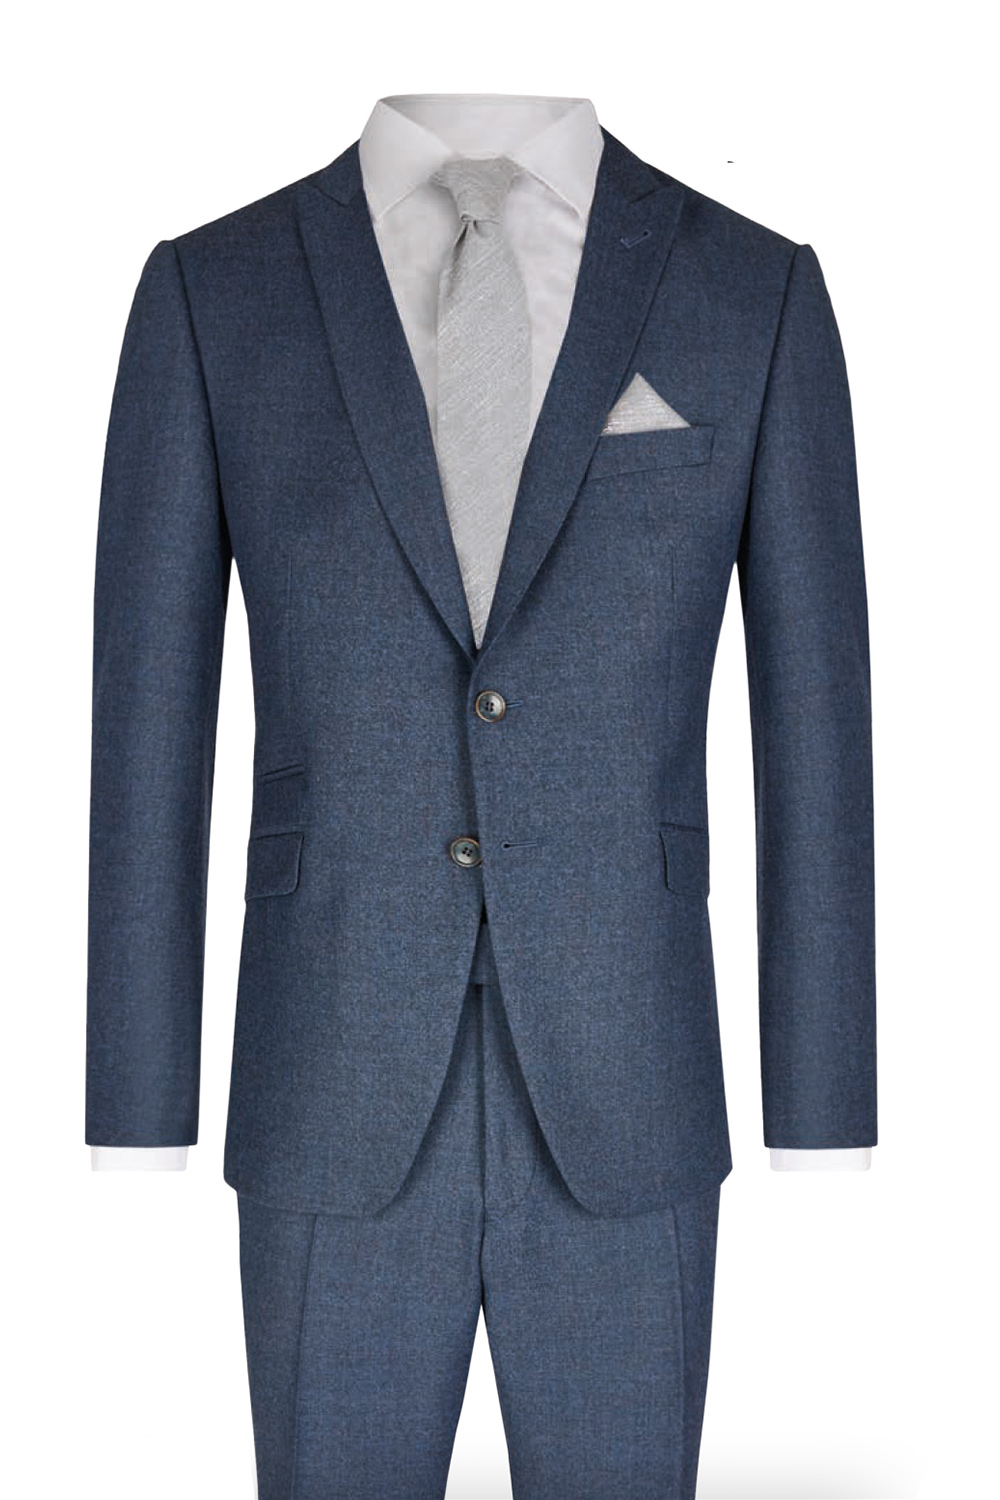 Blue 3 Piece Suit - Tom Murphy's Formal and Menswear